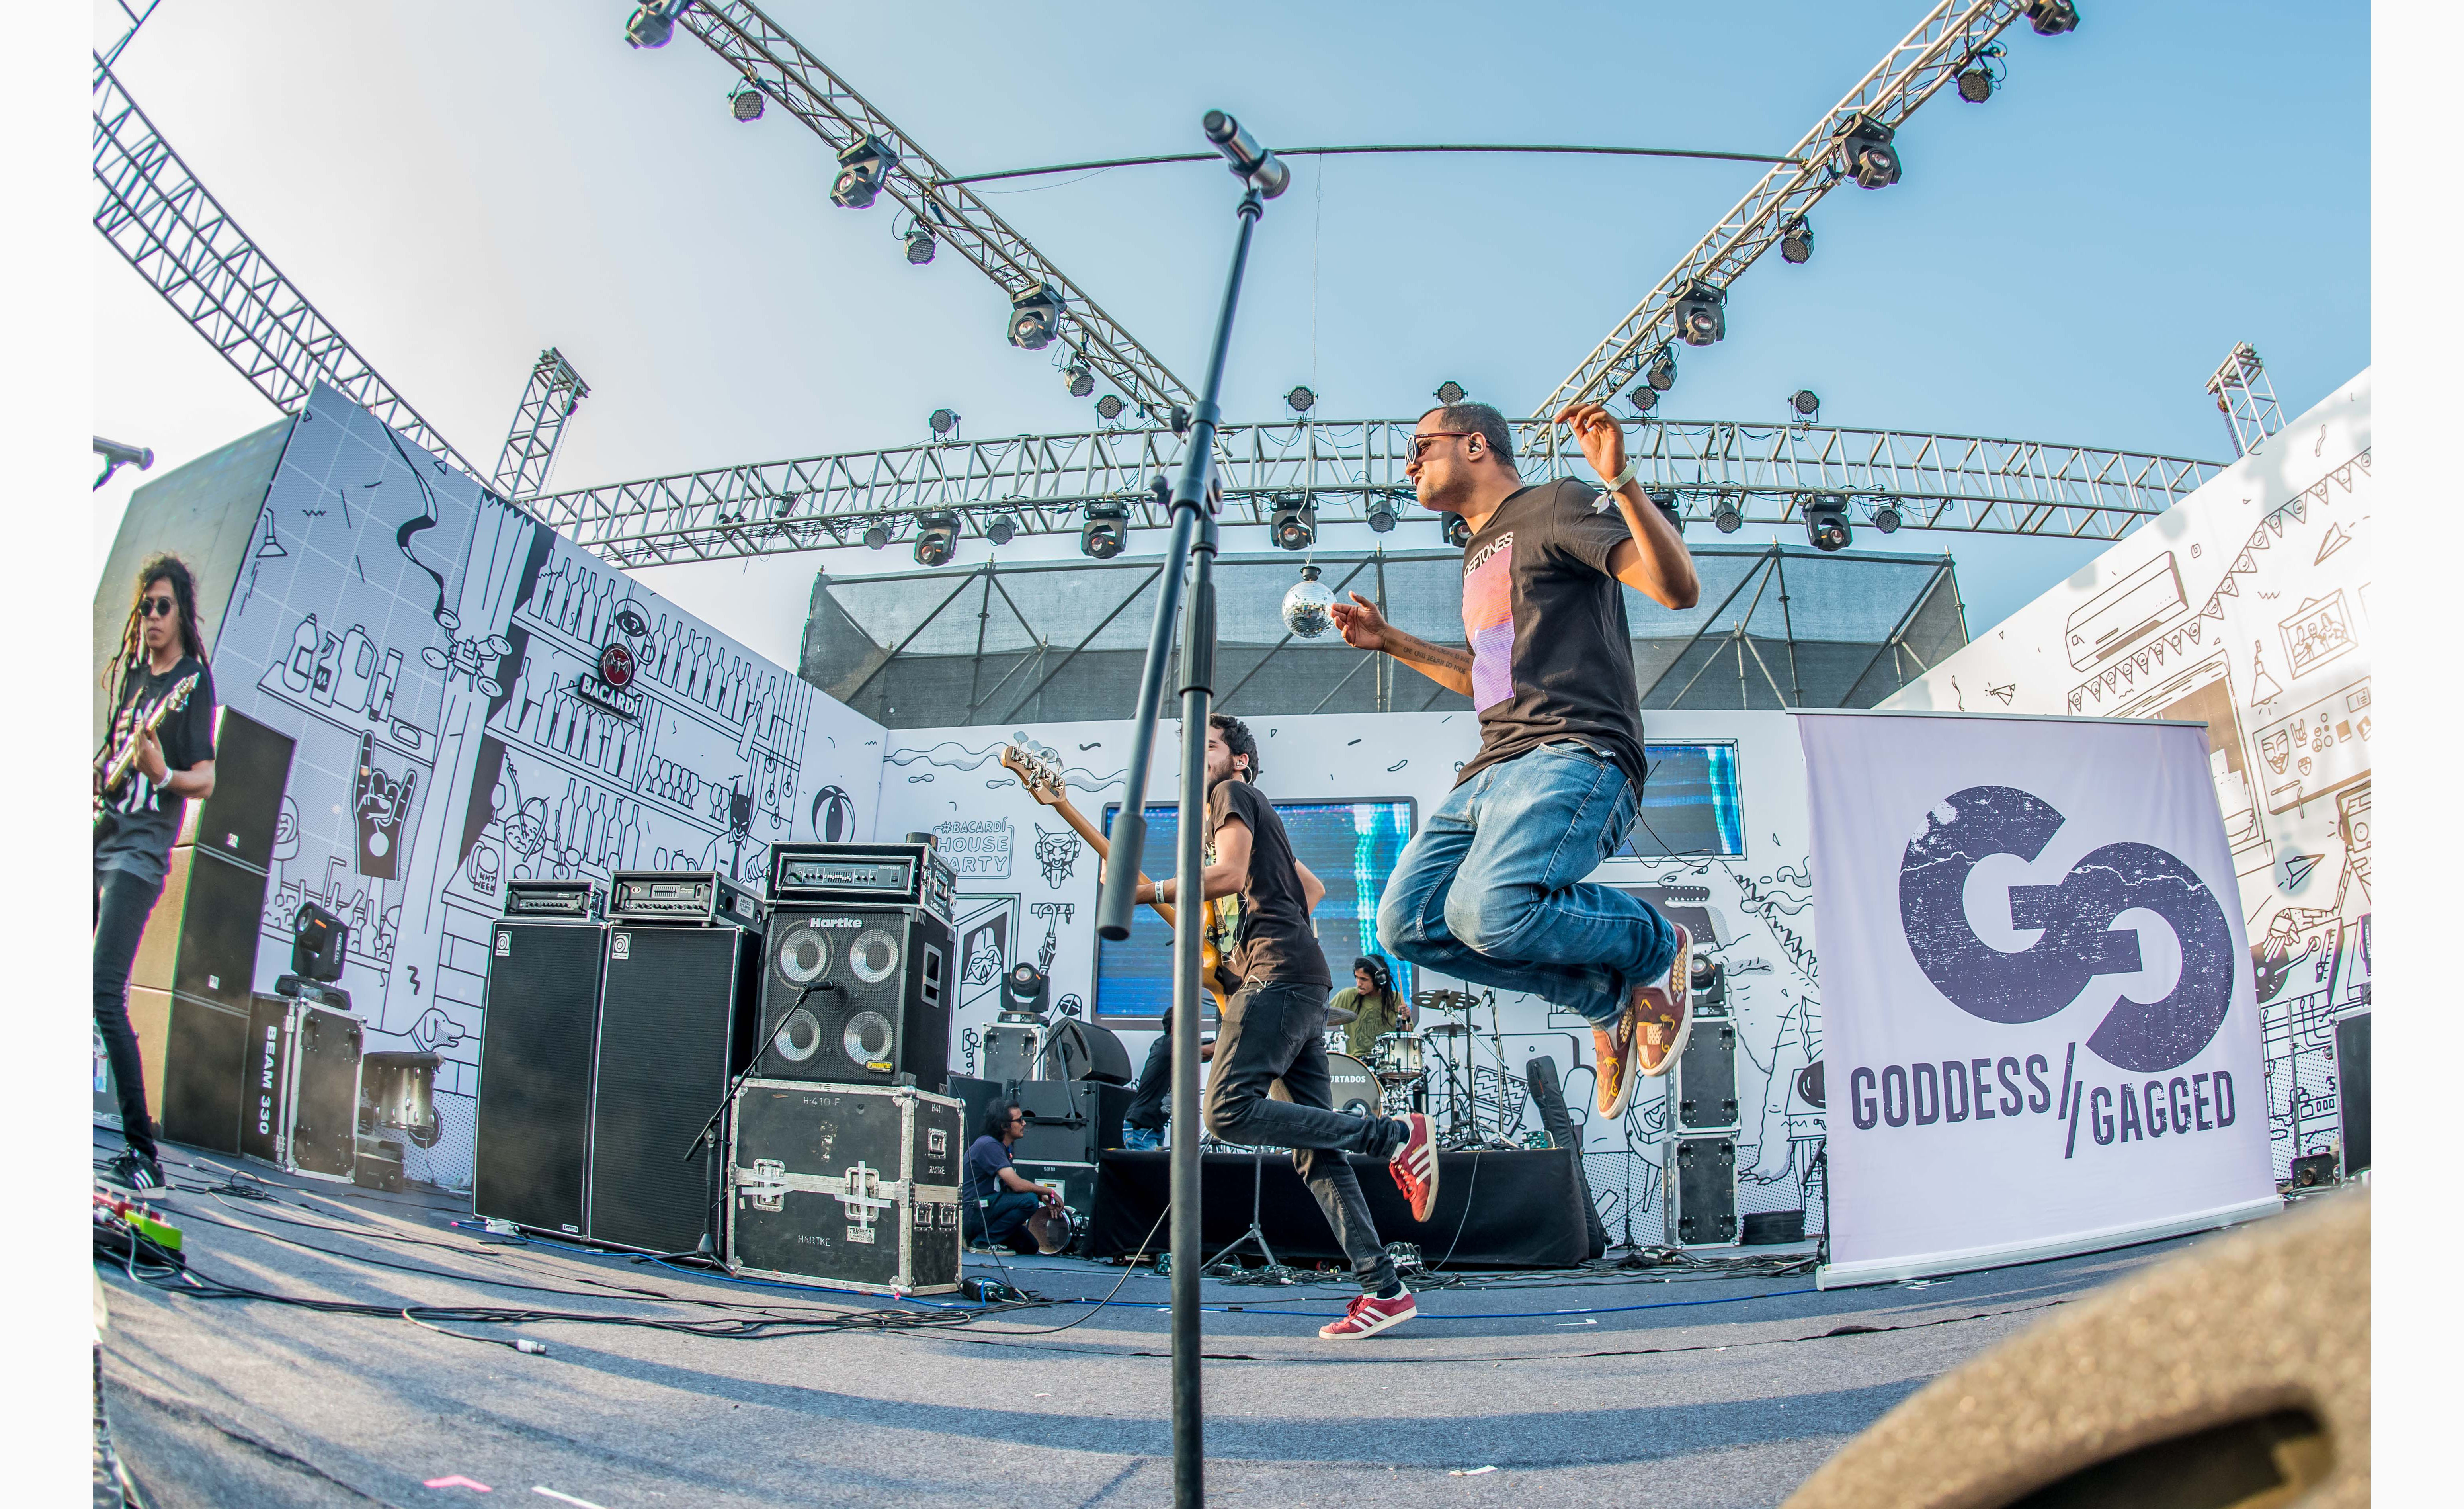  Goddess Gagged performance on Day 2 of Bacardi NH7 Weekender Pune. Photo Credit - Clique Photography